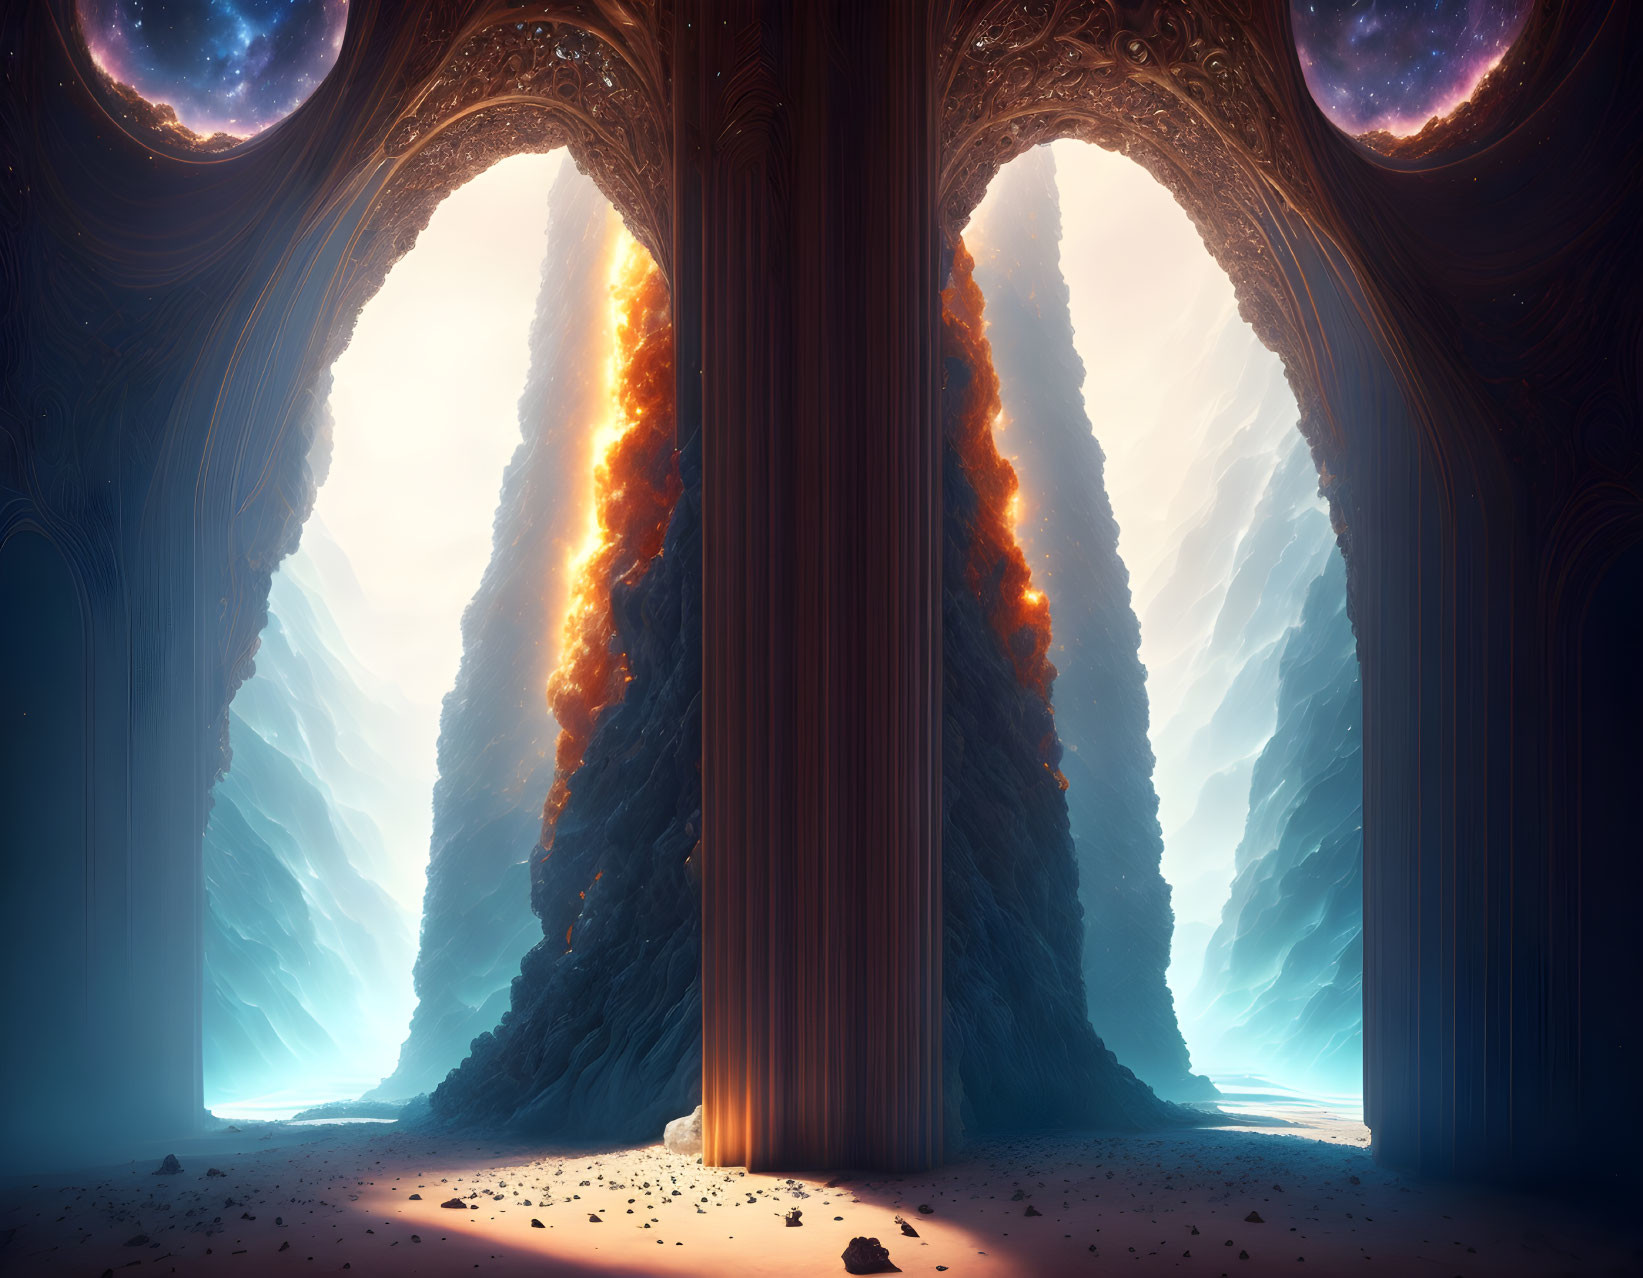 Fantastical cavern with ornate arches, glowing lava flows, and celestial sky